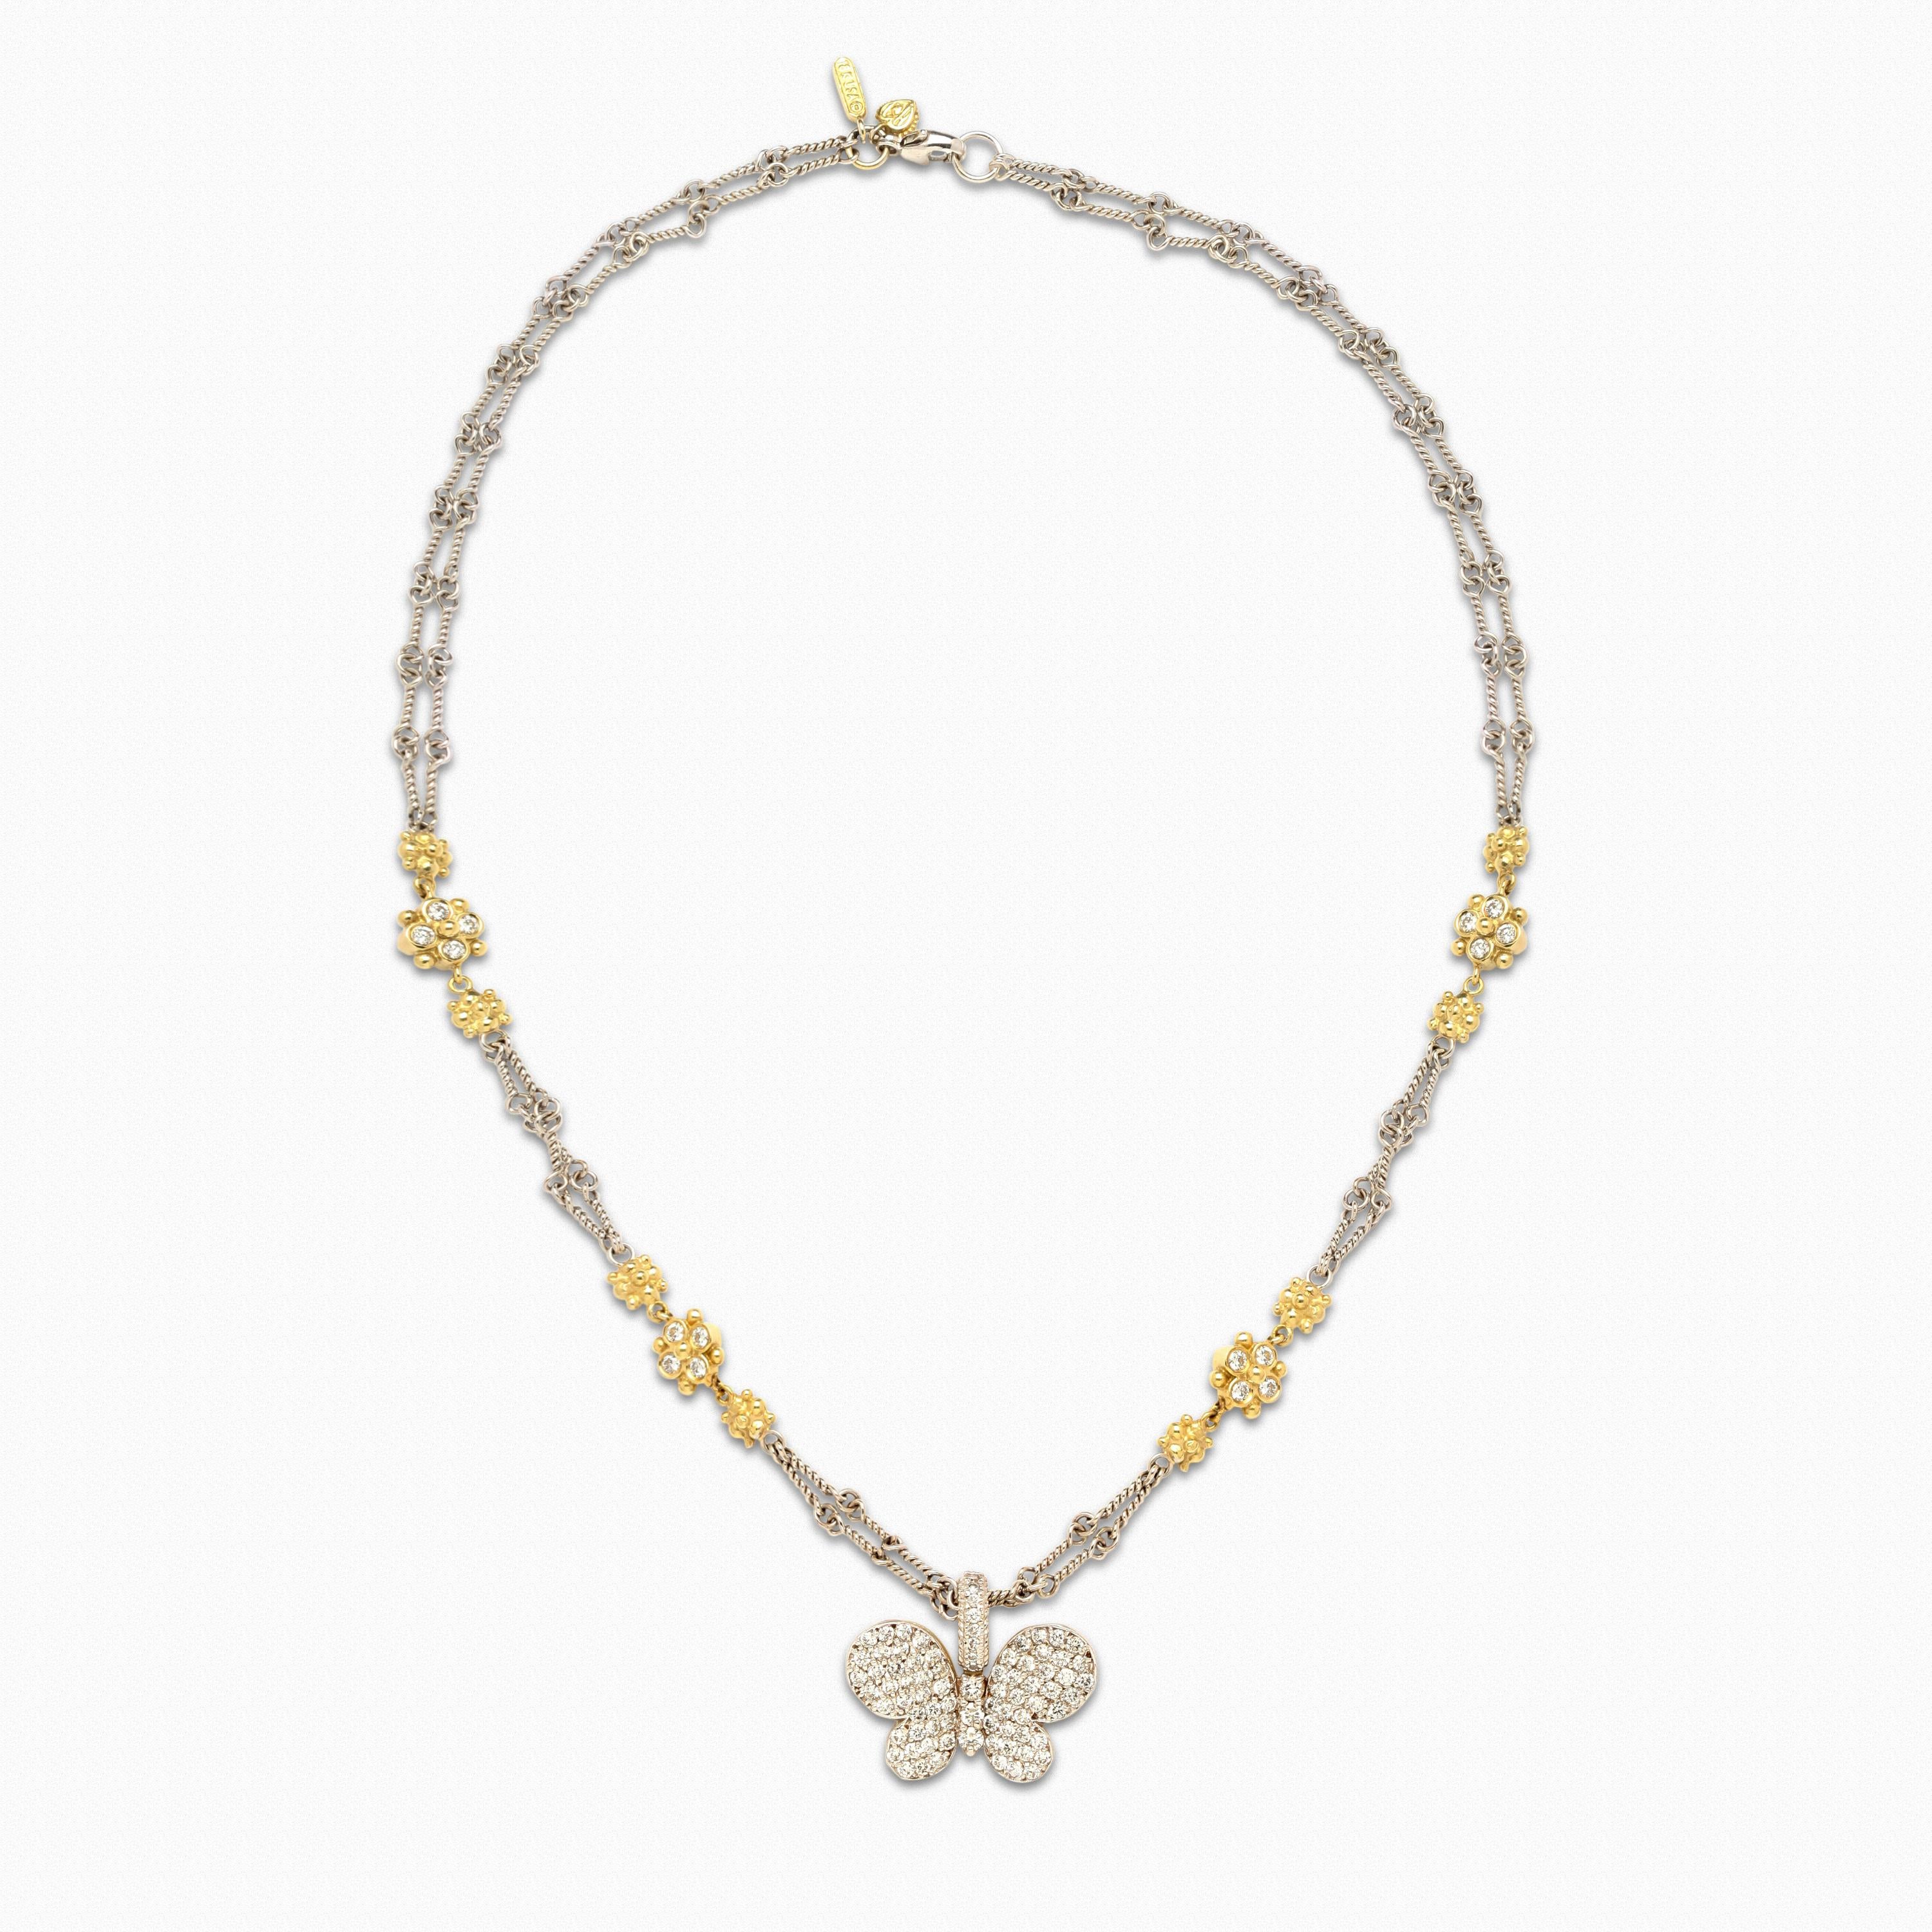 Stambolian 18K Two-Tone Diamond Cluster Chain with Butterfly Pendant Necklace

Butterfly can detach and chain can be worn on its own. Double-link chain is done in two-tone gold and the diamond bezels are double sided. Diamonds are set on both